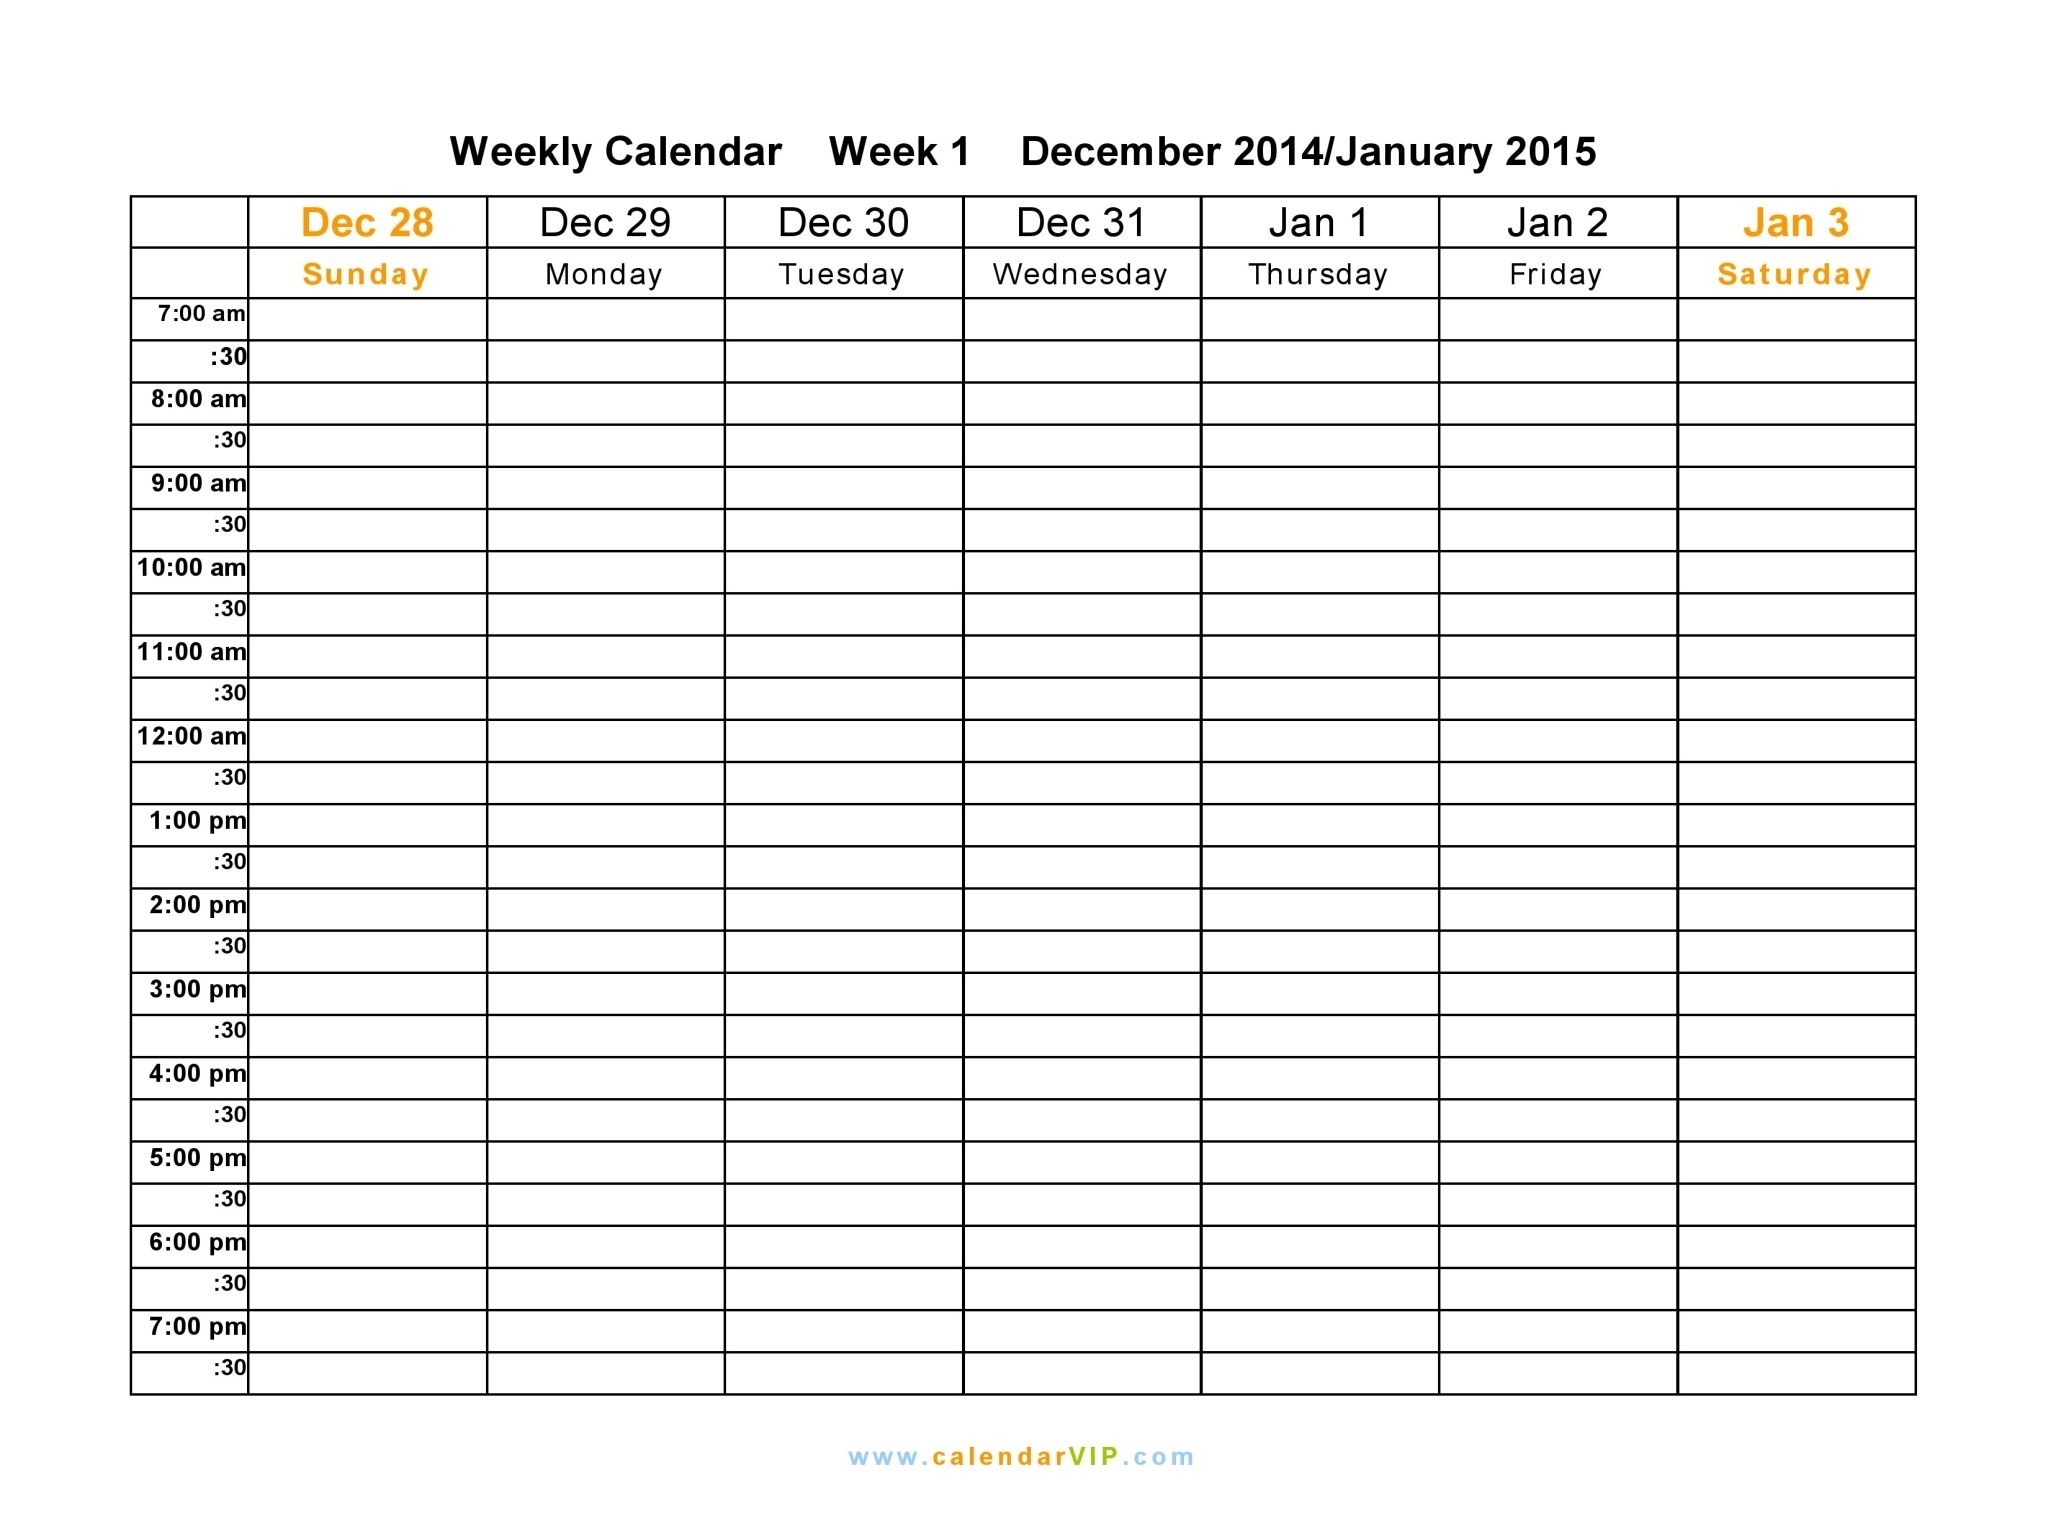 Free Printable Weekly Calendar Templates Swe Pinterest Blank with Full Size Weekly Calendar Templates